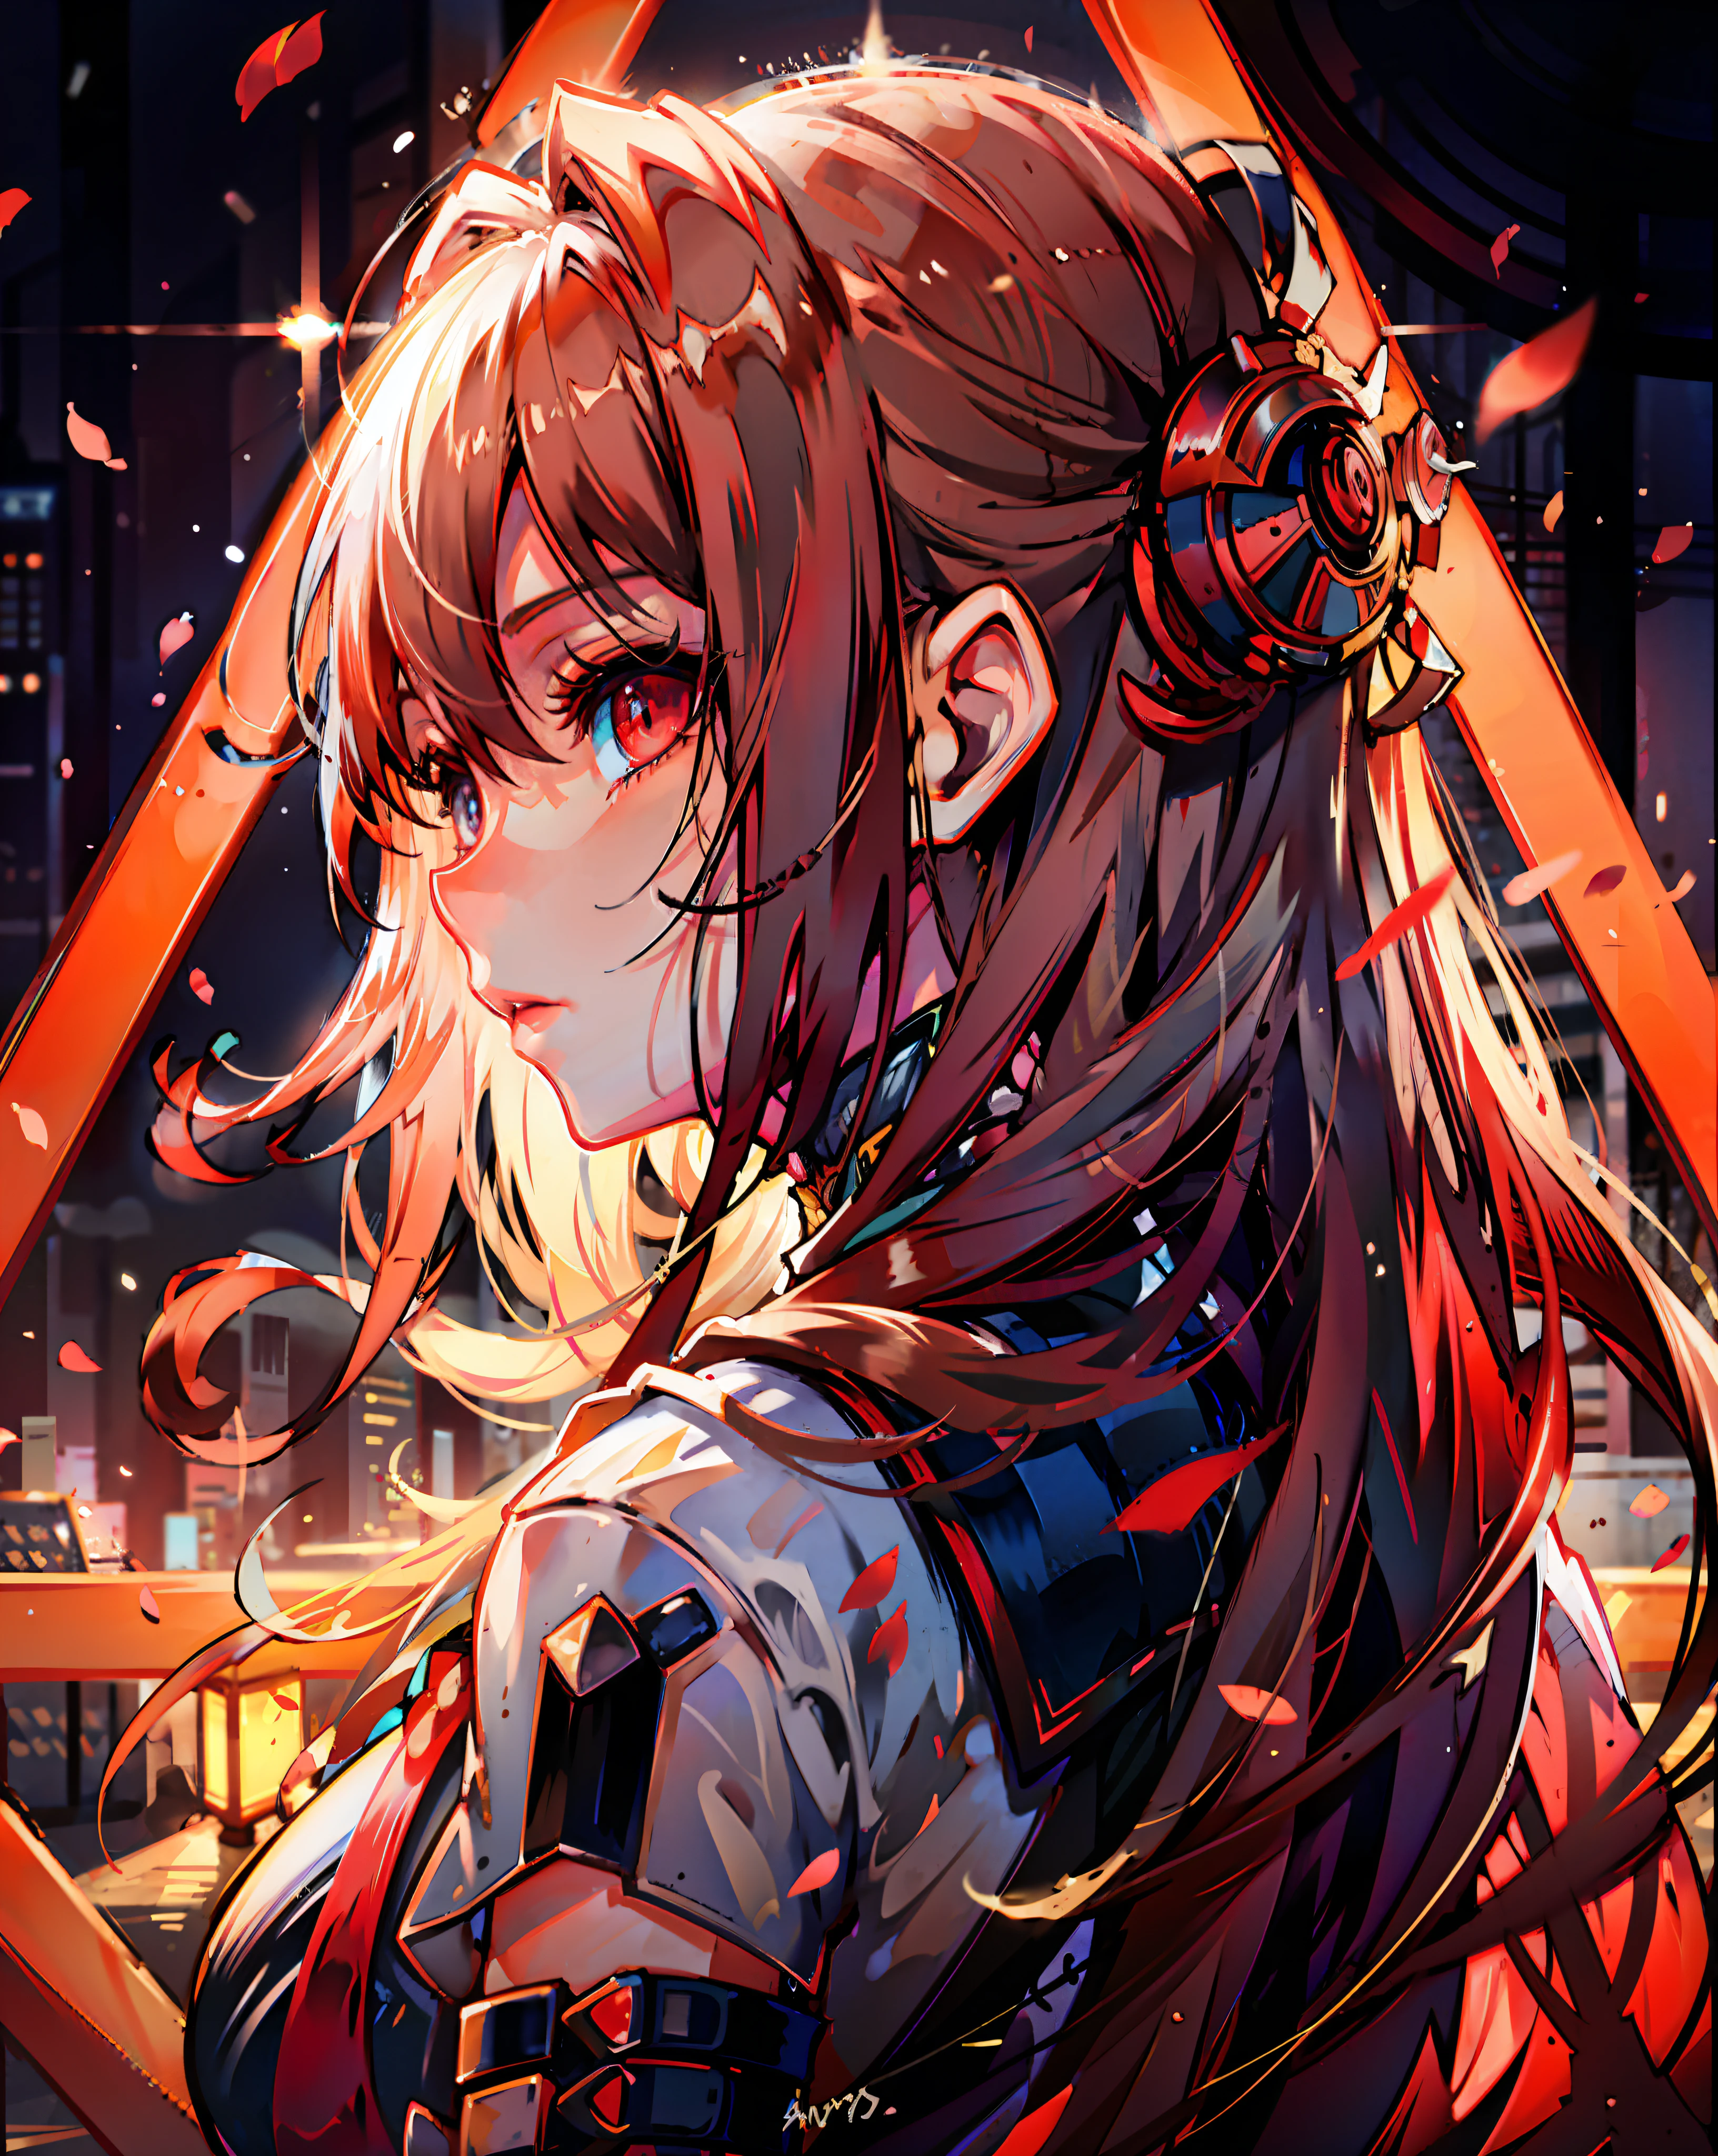 anime girl with long hair and red eyes standing in front of a city, best anime 4k konachan wallpaper, anime style 4 k, anime wallpaper 4 k, anime wallpaper 4k, cyberpunk anime girl, digital cyberpunk anime art, cyberpunk anime art, anime art wallpaper 4 k, anime art wallpaper 4k, anime art wallpaper 8 k, 4k anime wallpaper